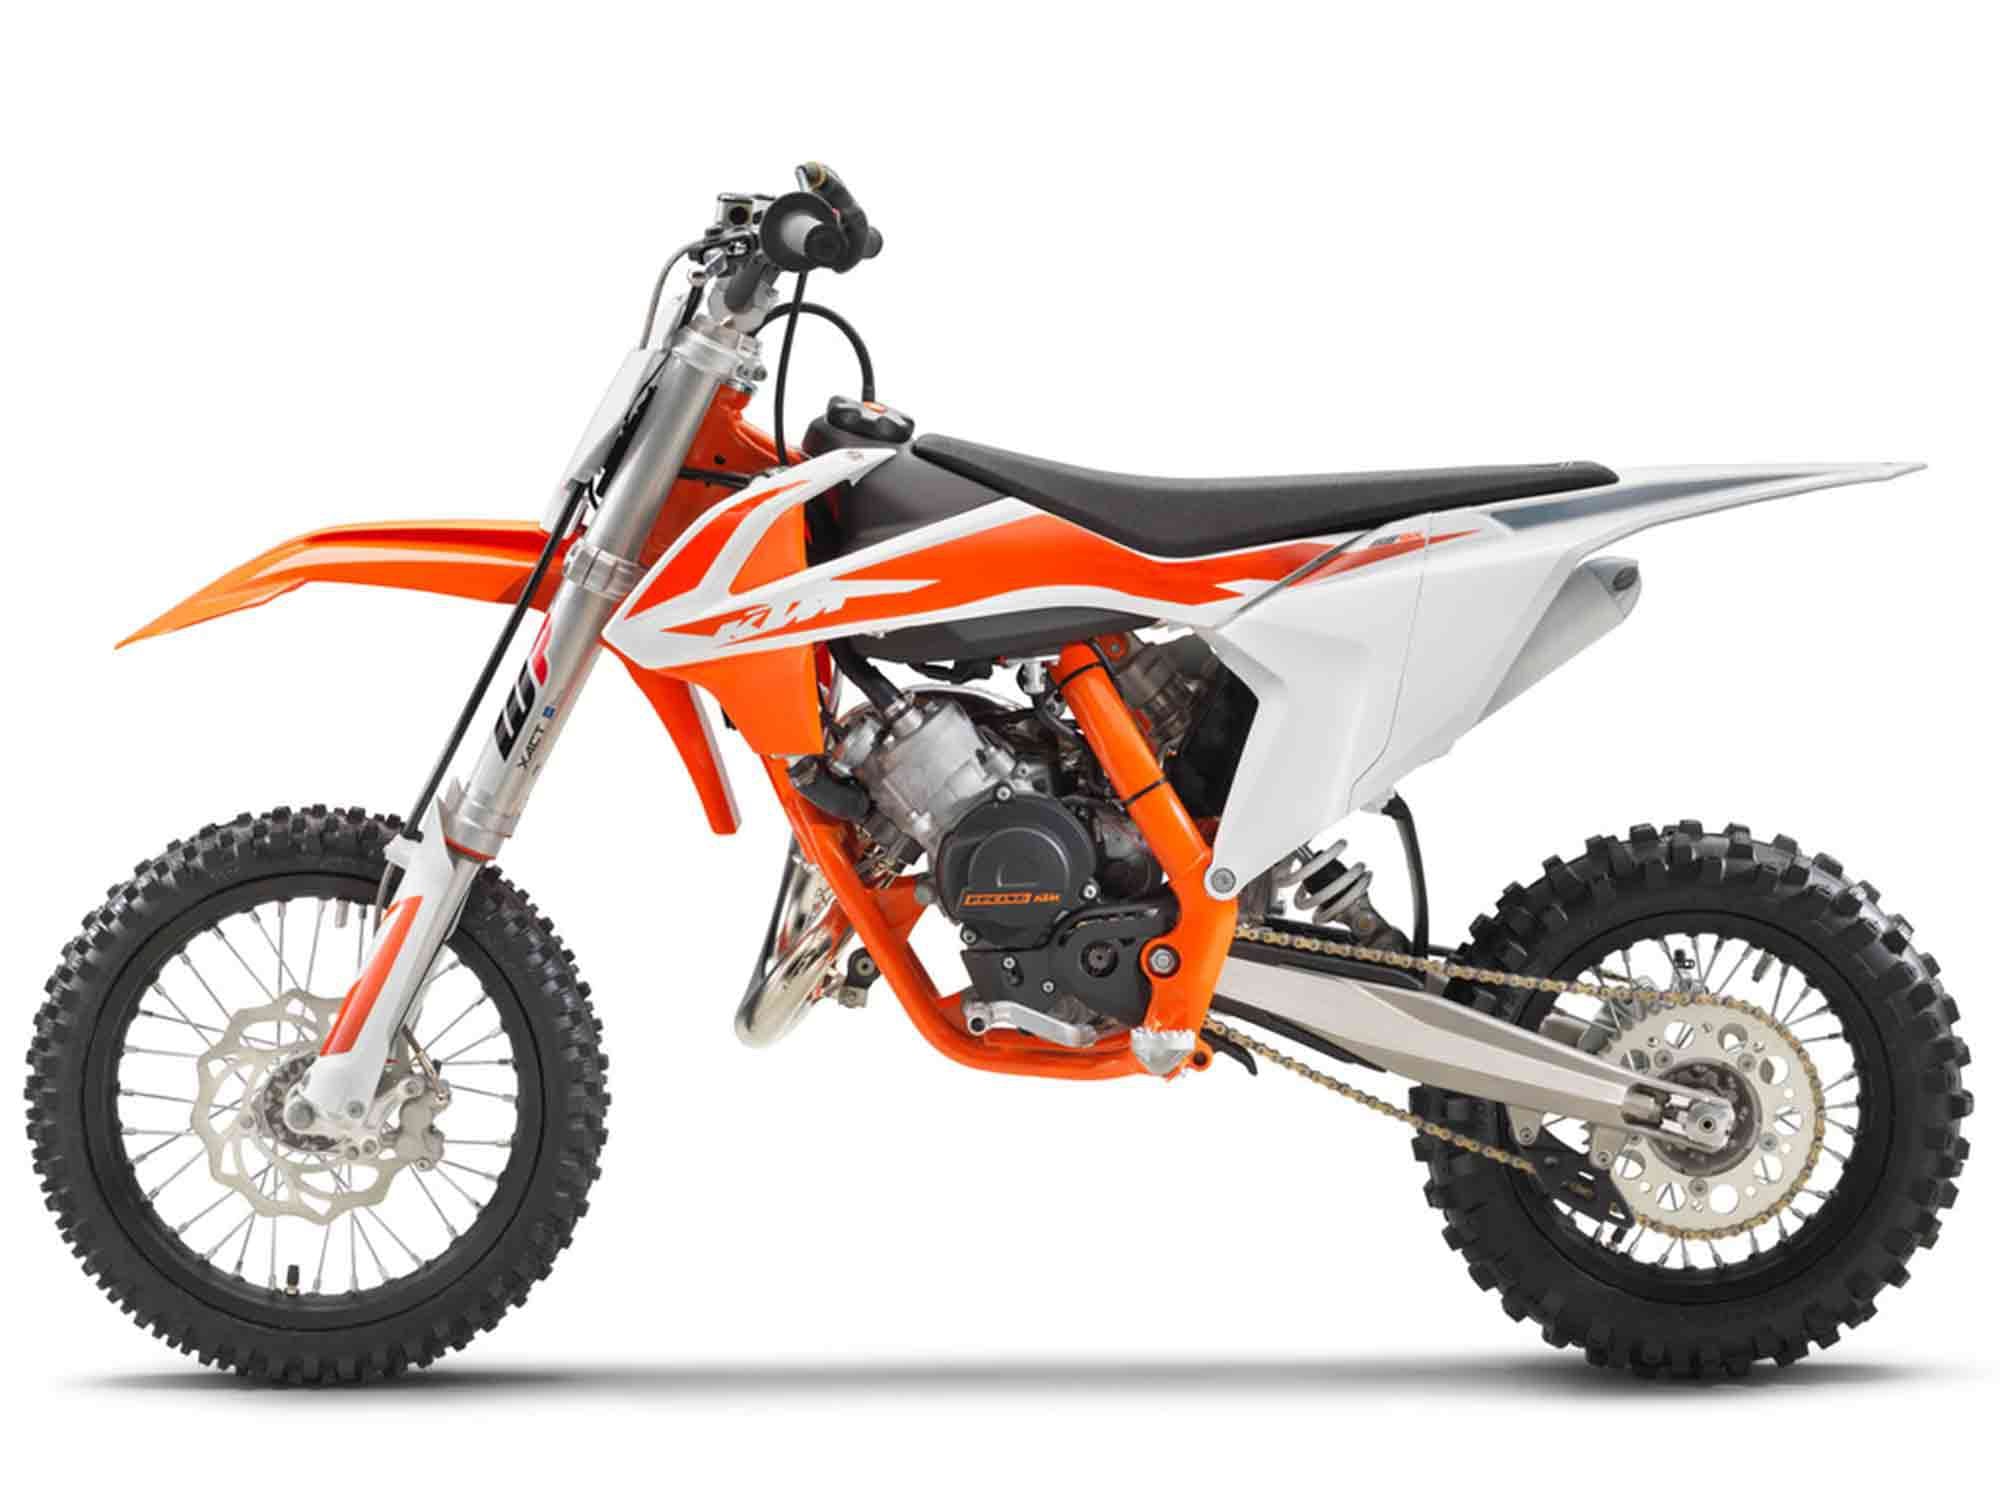 fotografering Opmuntring Canberra 2020 KTM 65 SX Buyer's Guide: Specs, Photos, Price | Cycle World